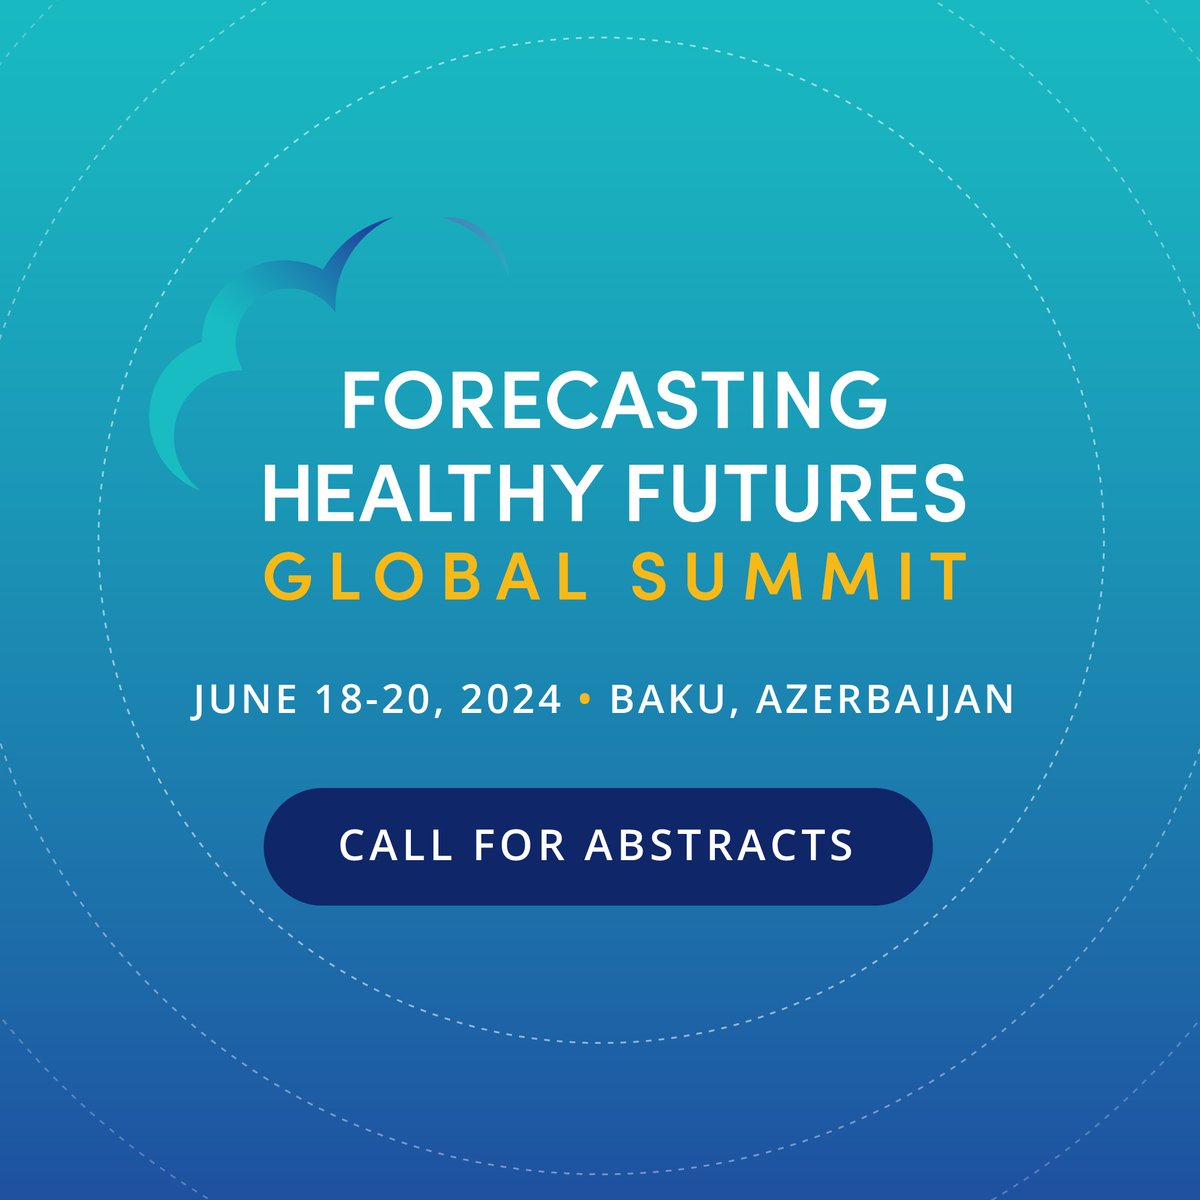 📢 Calling all climate and health enthusiasts, researchers, and professionals! 🌍 Registration and #CallForAbstracts are open for the #FHFSummit! 

Learn more: fhfsummit.org